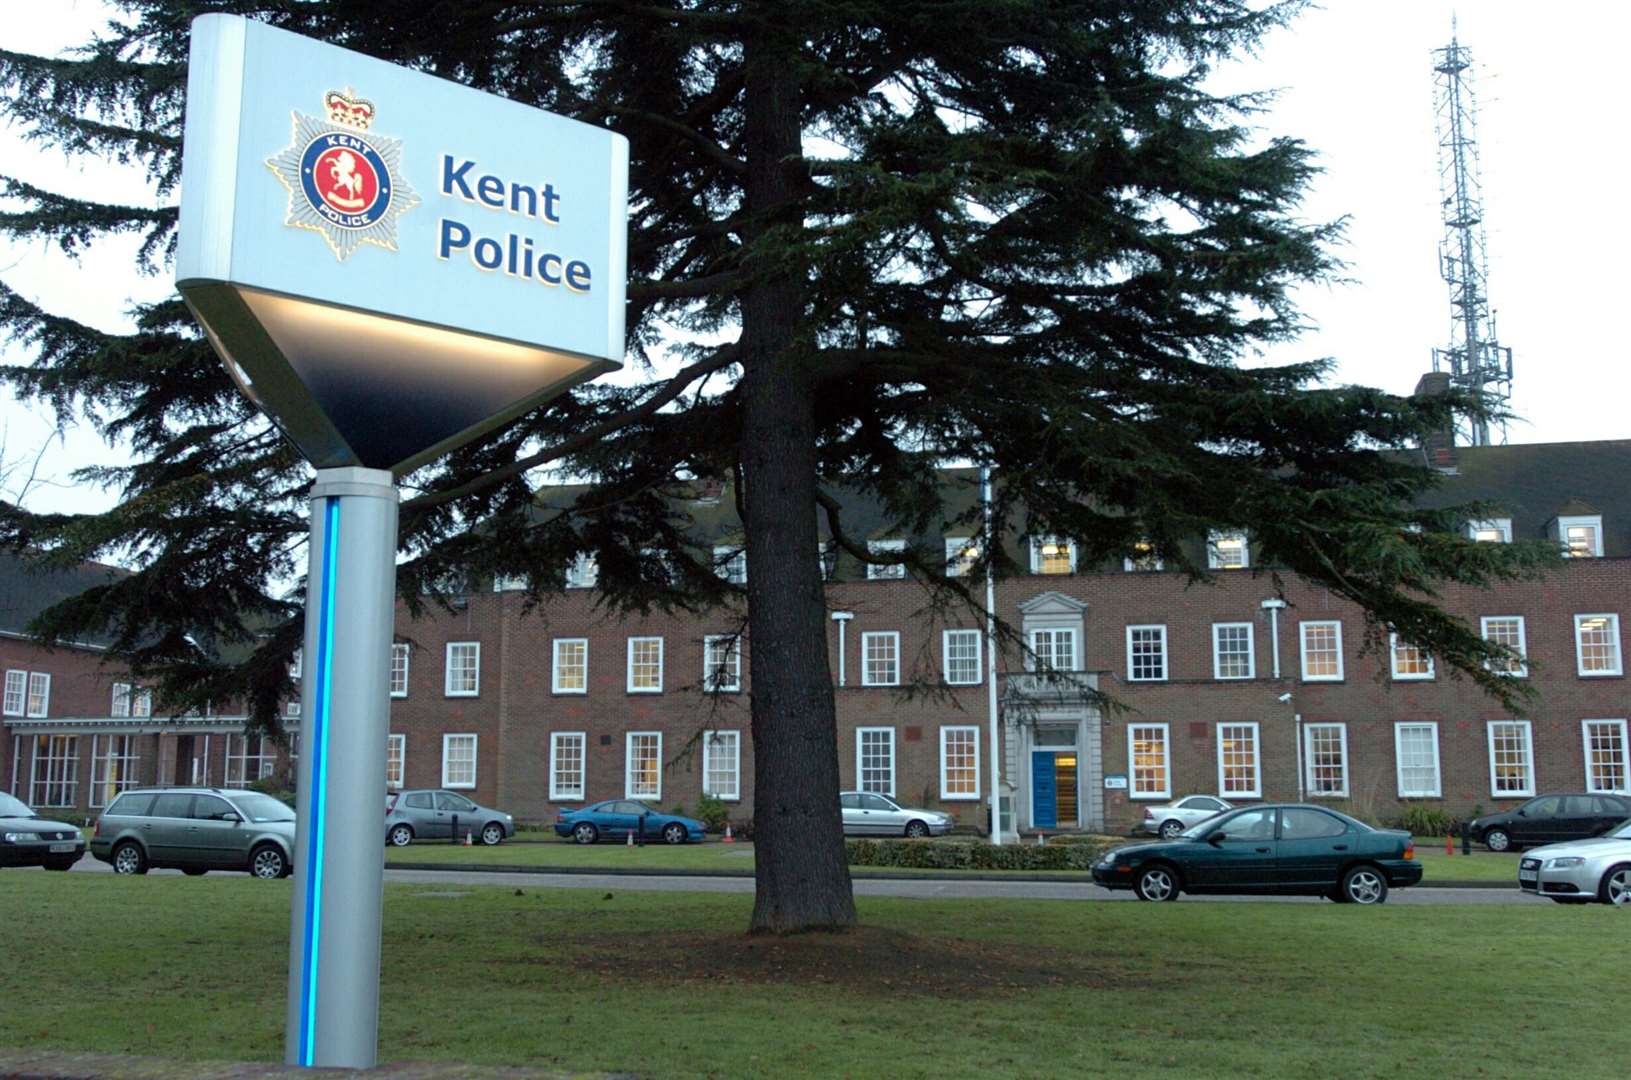 Kent Police Headquarters, Sutton Road, Maidstone where the hearing was held